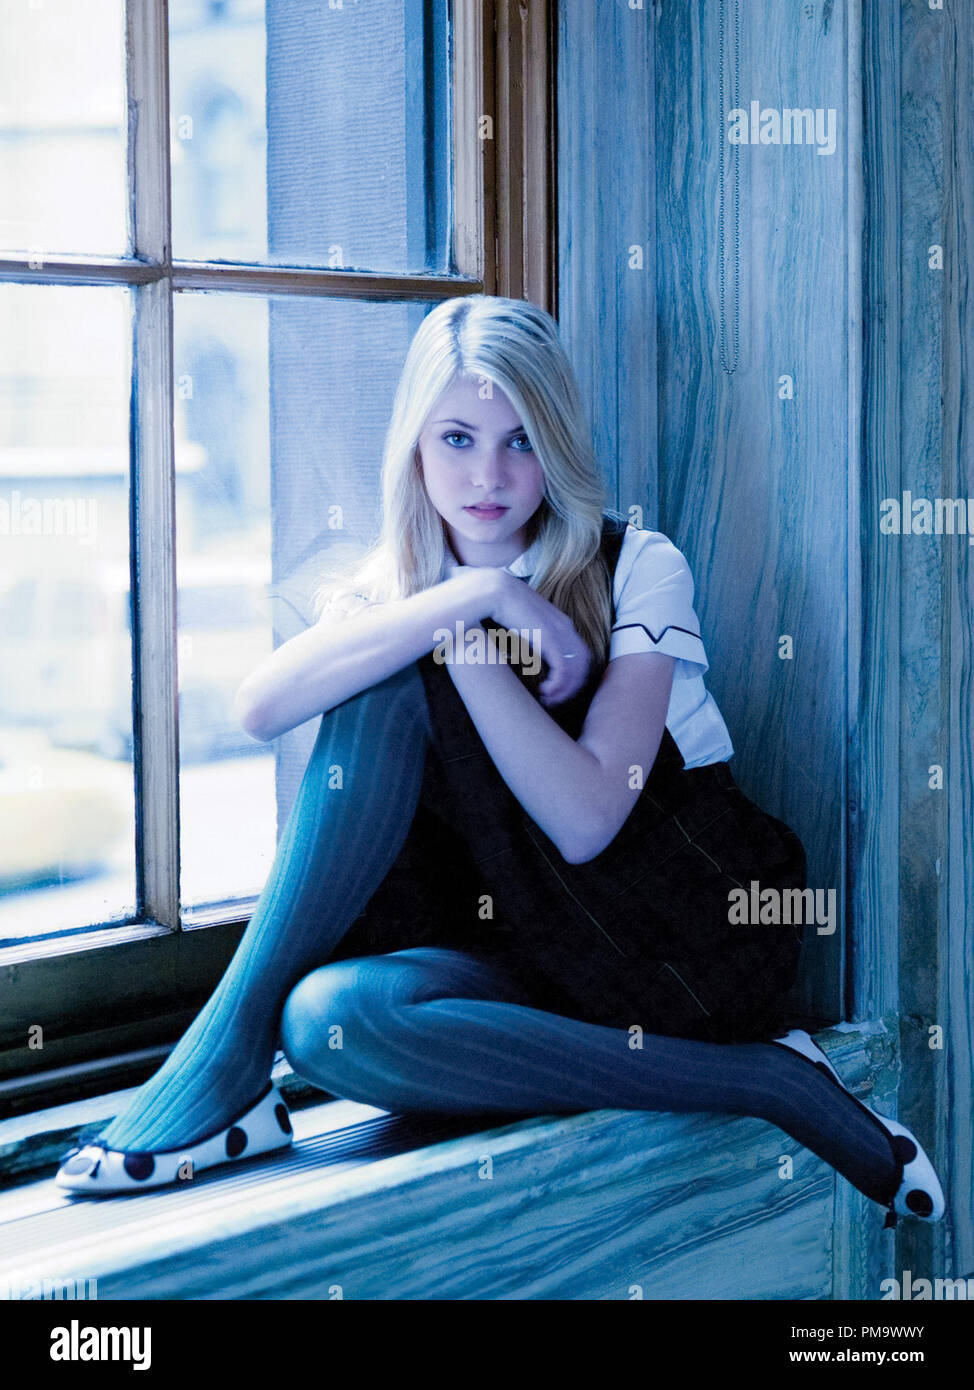 Gossip Girl Pictured: Taylor Momsen as Jenny Humphrey Photo Credit: Andrew Eccles / The CW © 2007 The CW Network, LLC. All Rights Reserved. Stock Photo